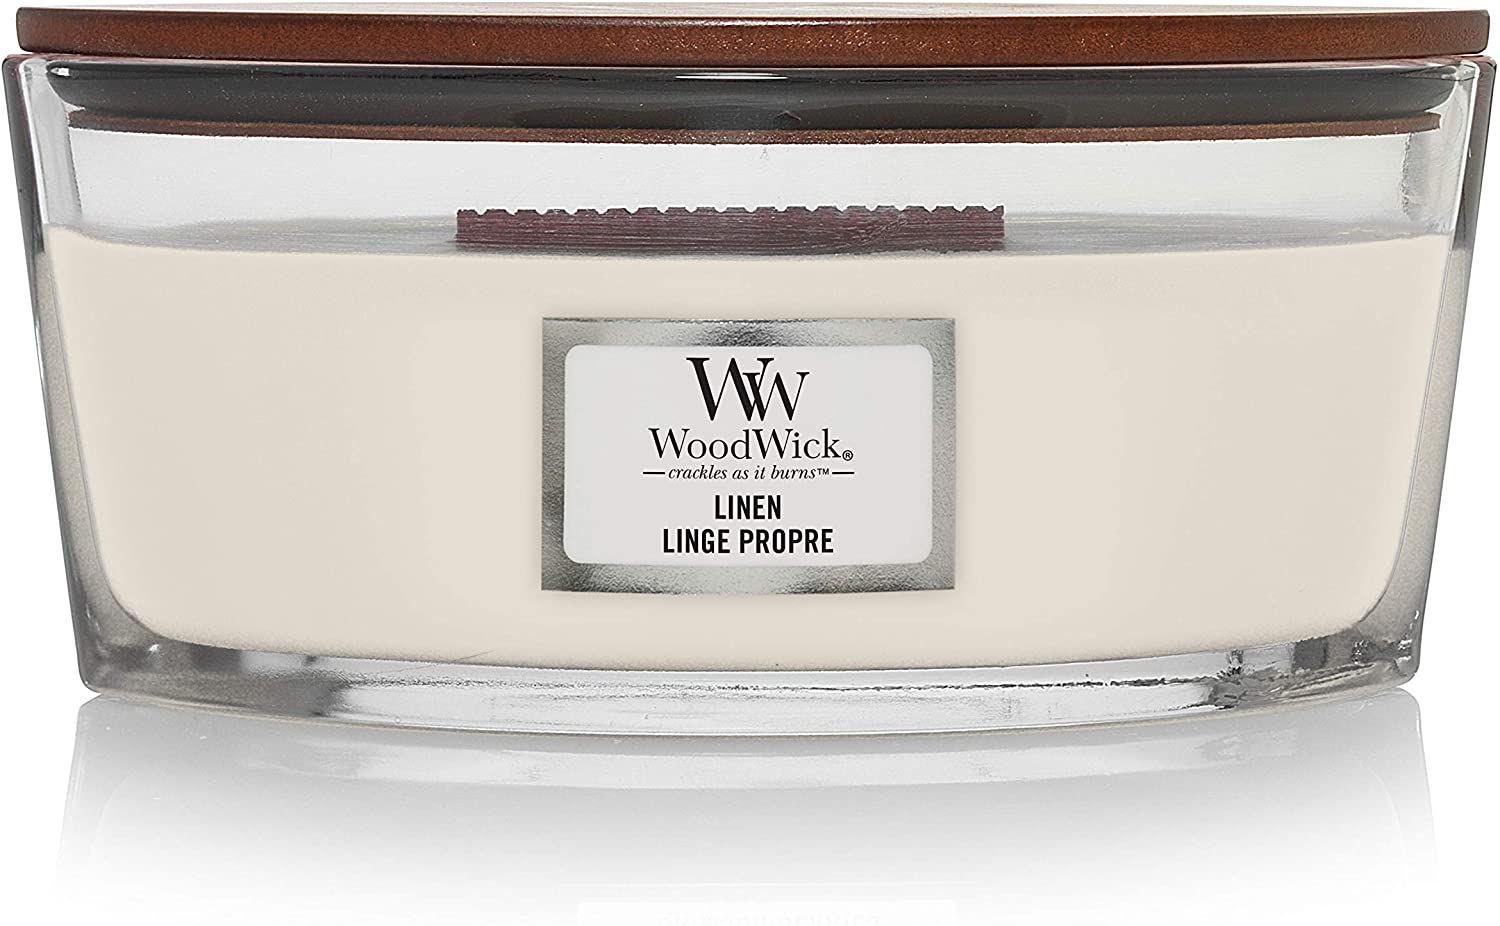 Woodwick At The Beach Scented Elliptical-Shaped Candle